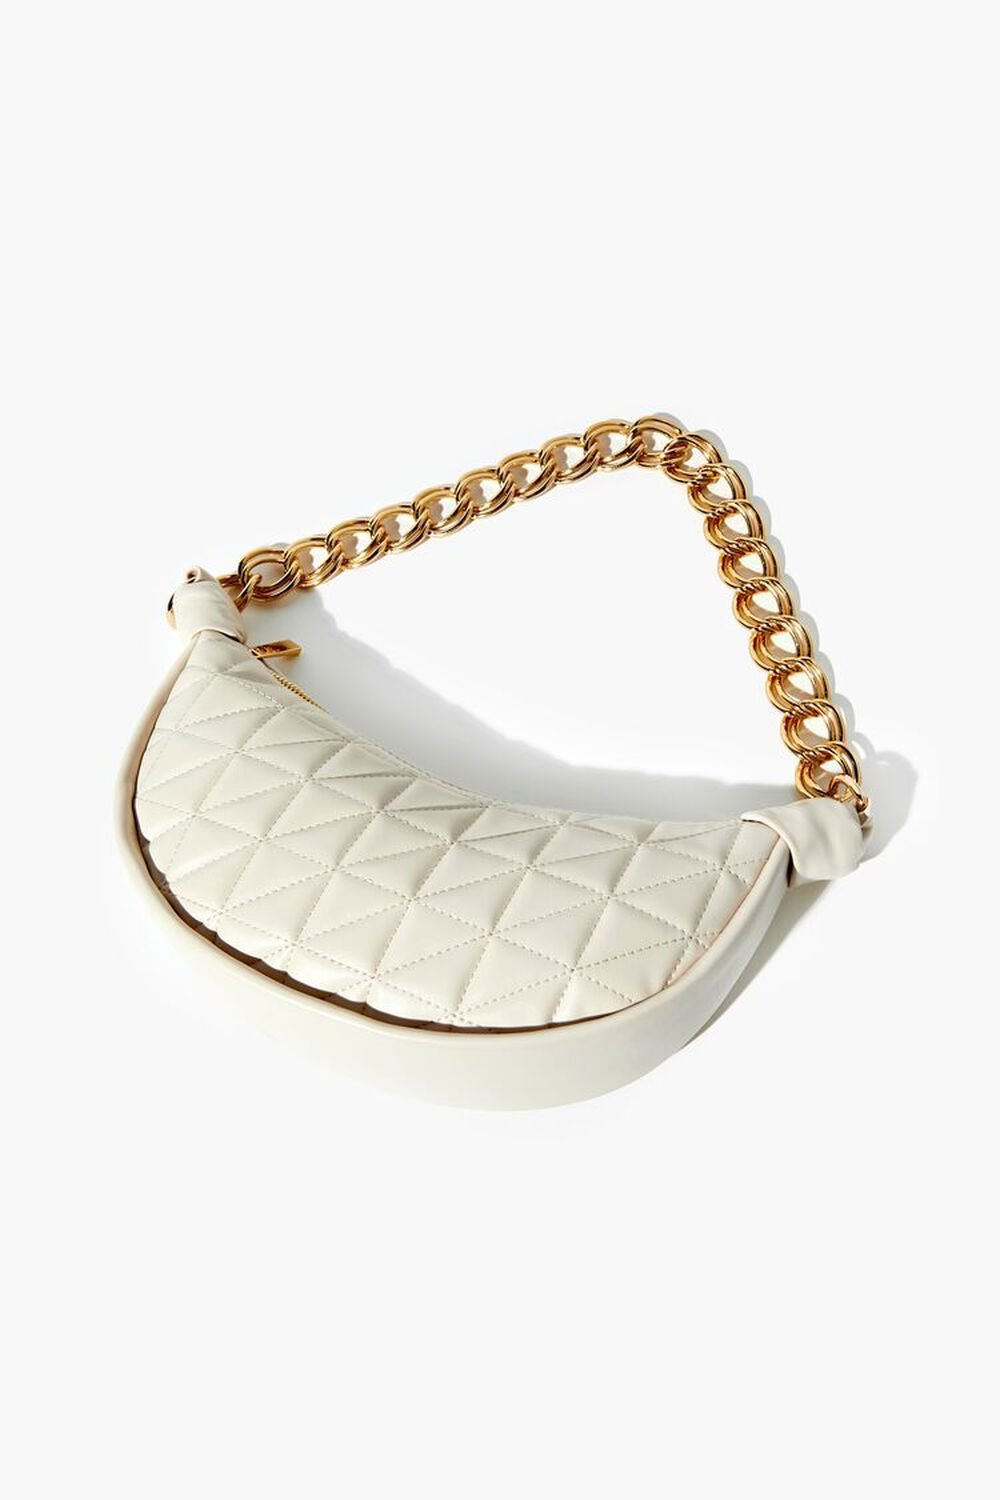 CREAM Quilted Faux Leather Shoulder Bag, image 1